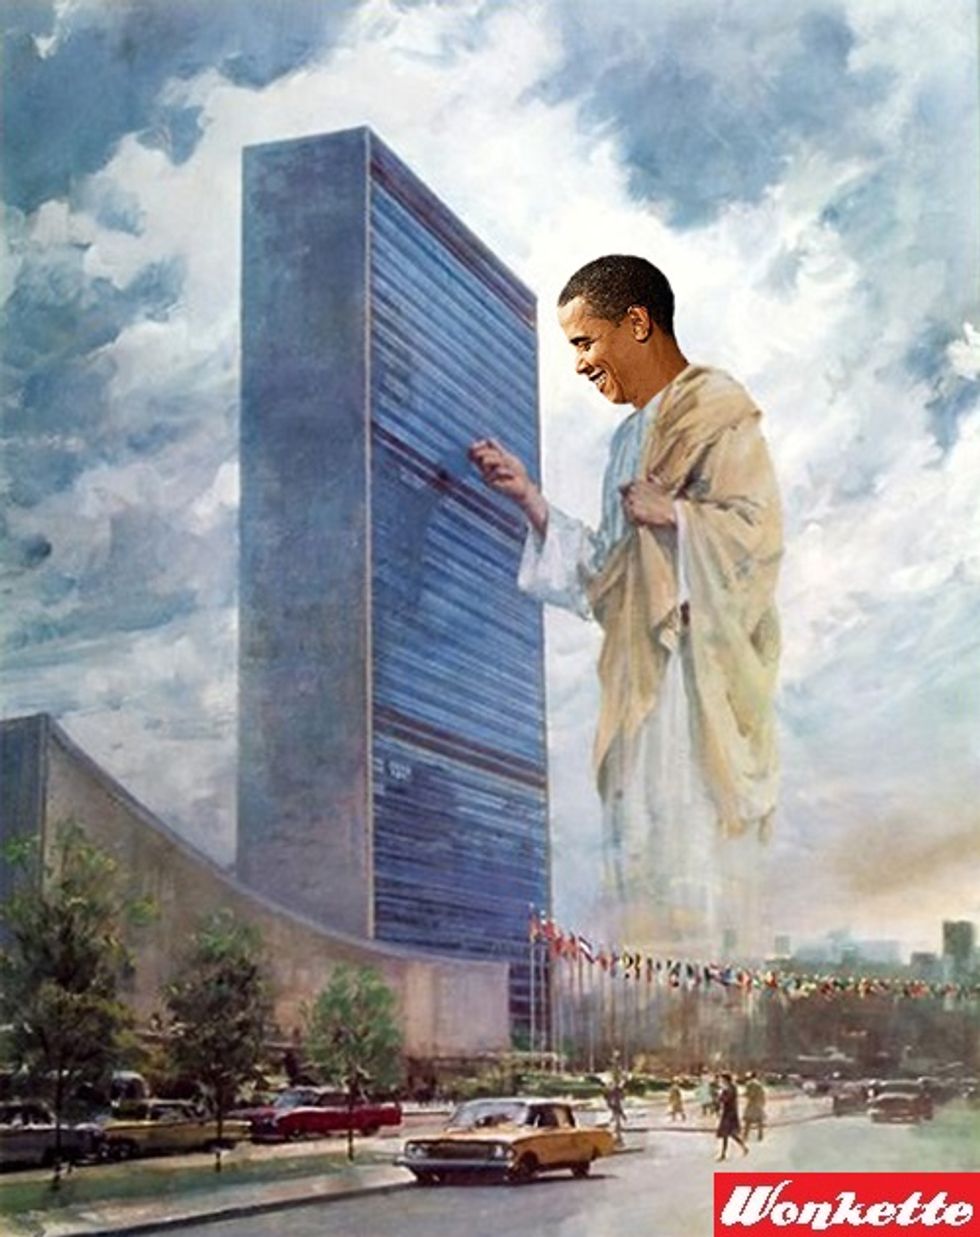 Michele Bachmann Not About To Let Obama Become Antichrist At The United Nations, No Way